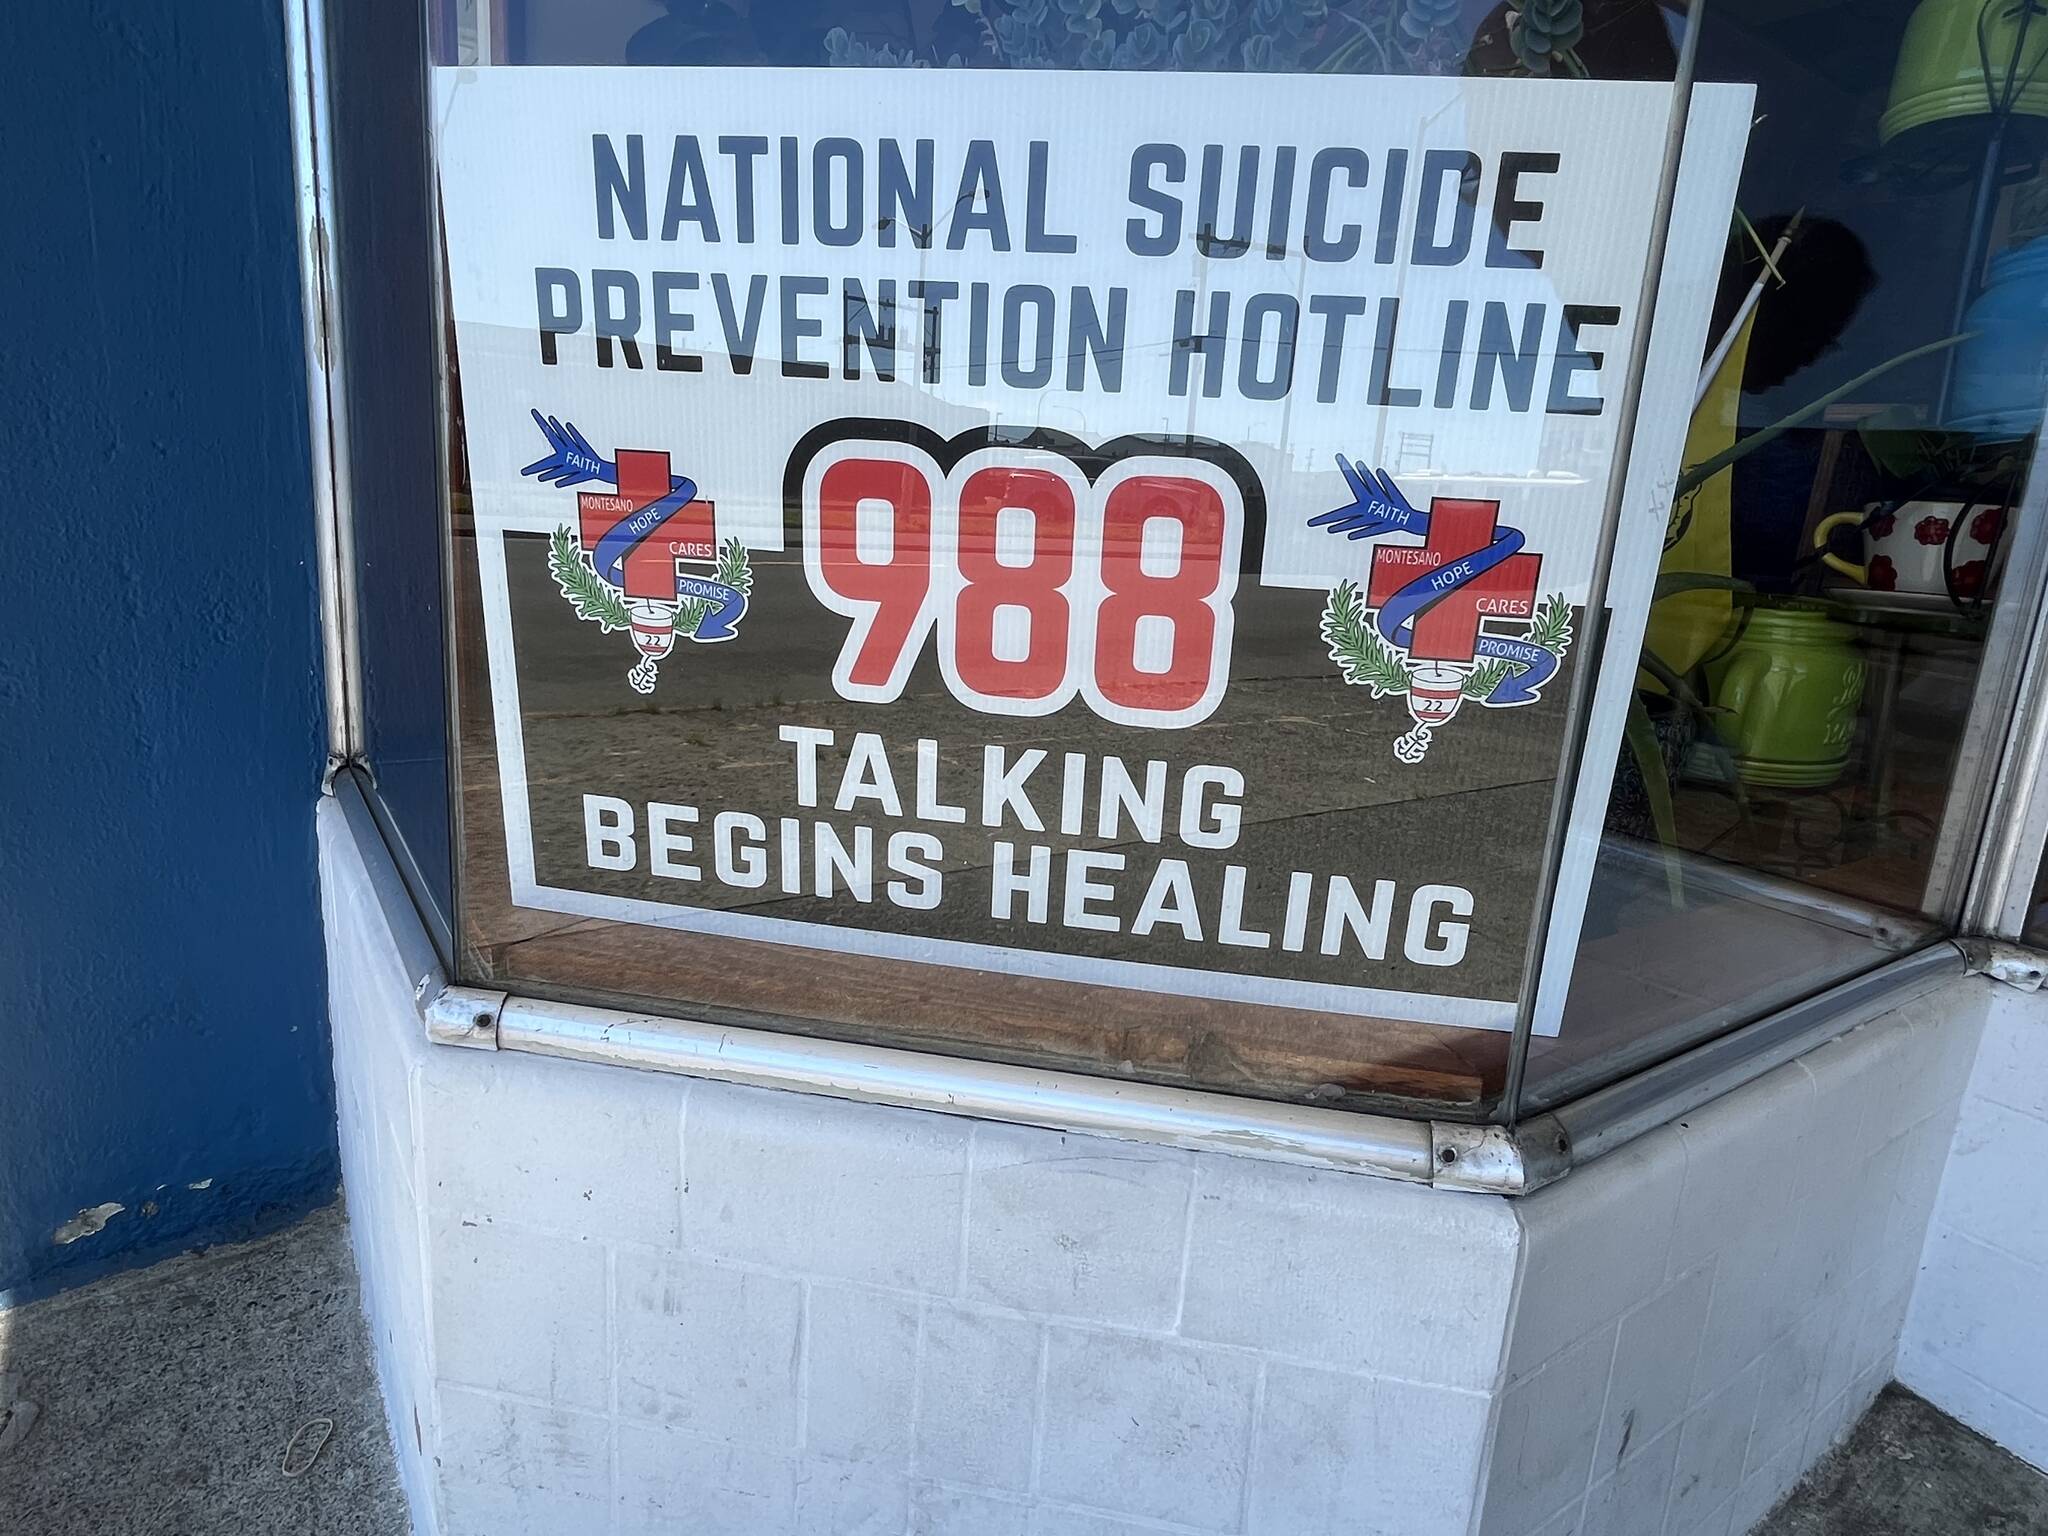 For people thinking about suicide, call 988, the official National Suicide Prevention Hotline phone number. (The Daily World file photo)